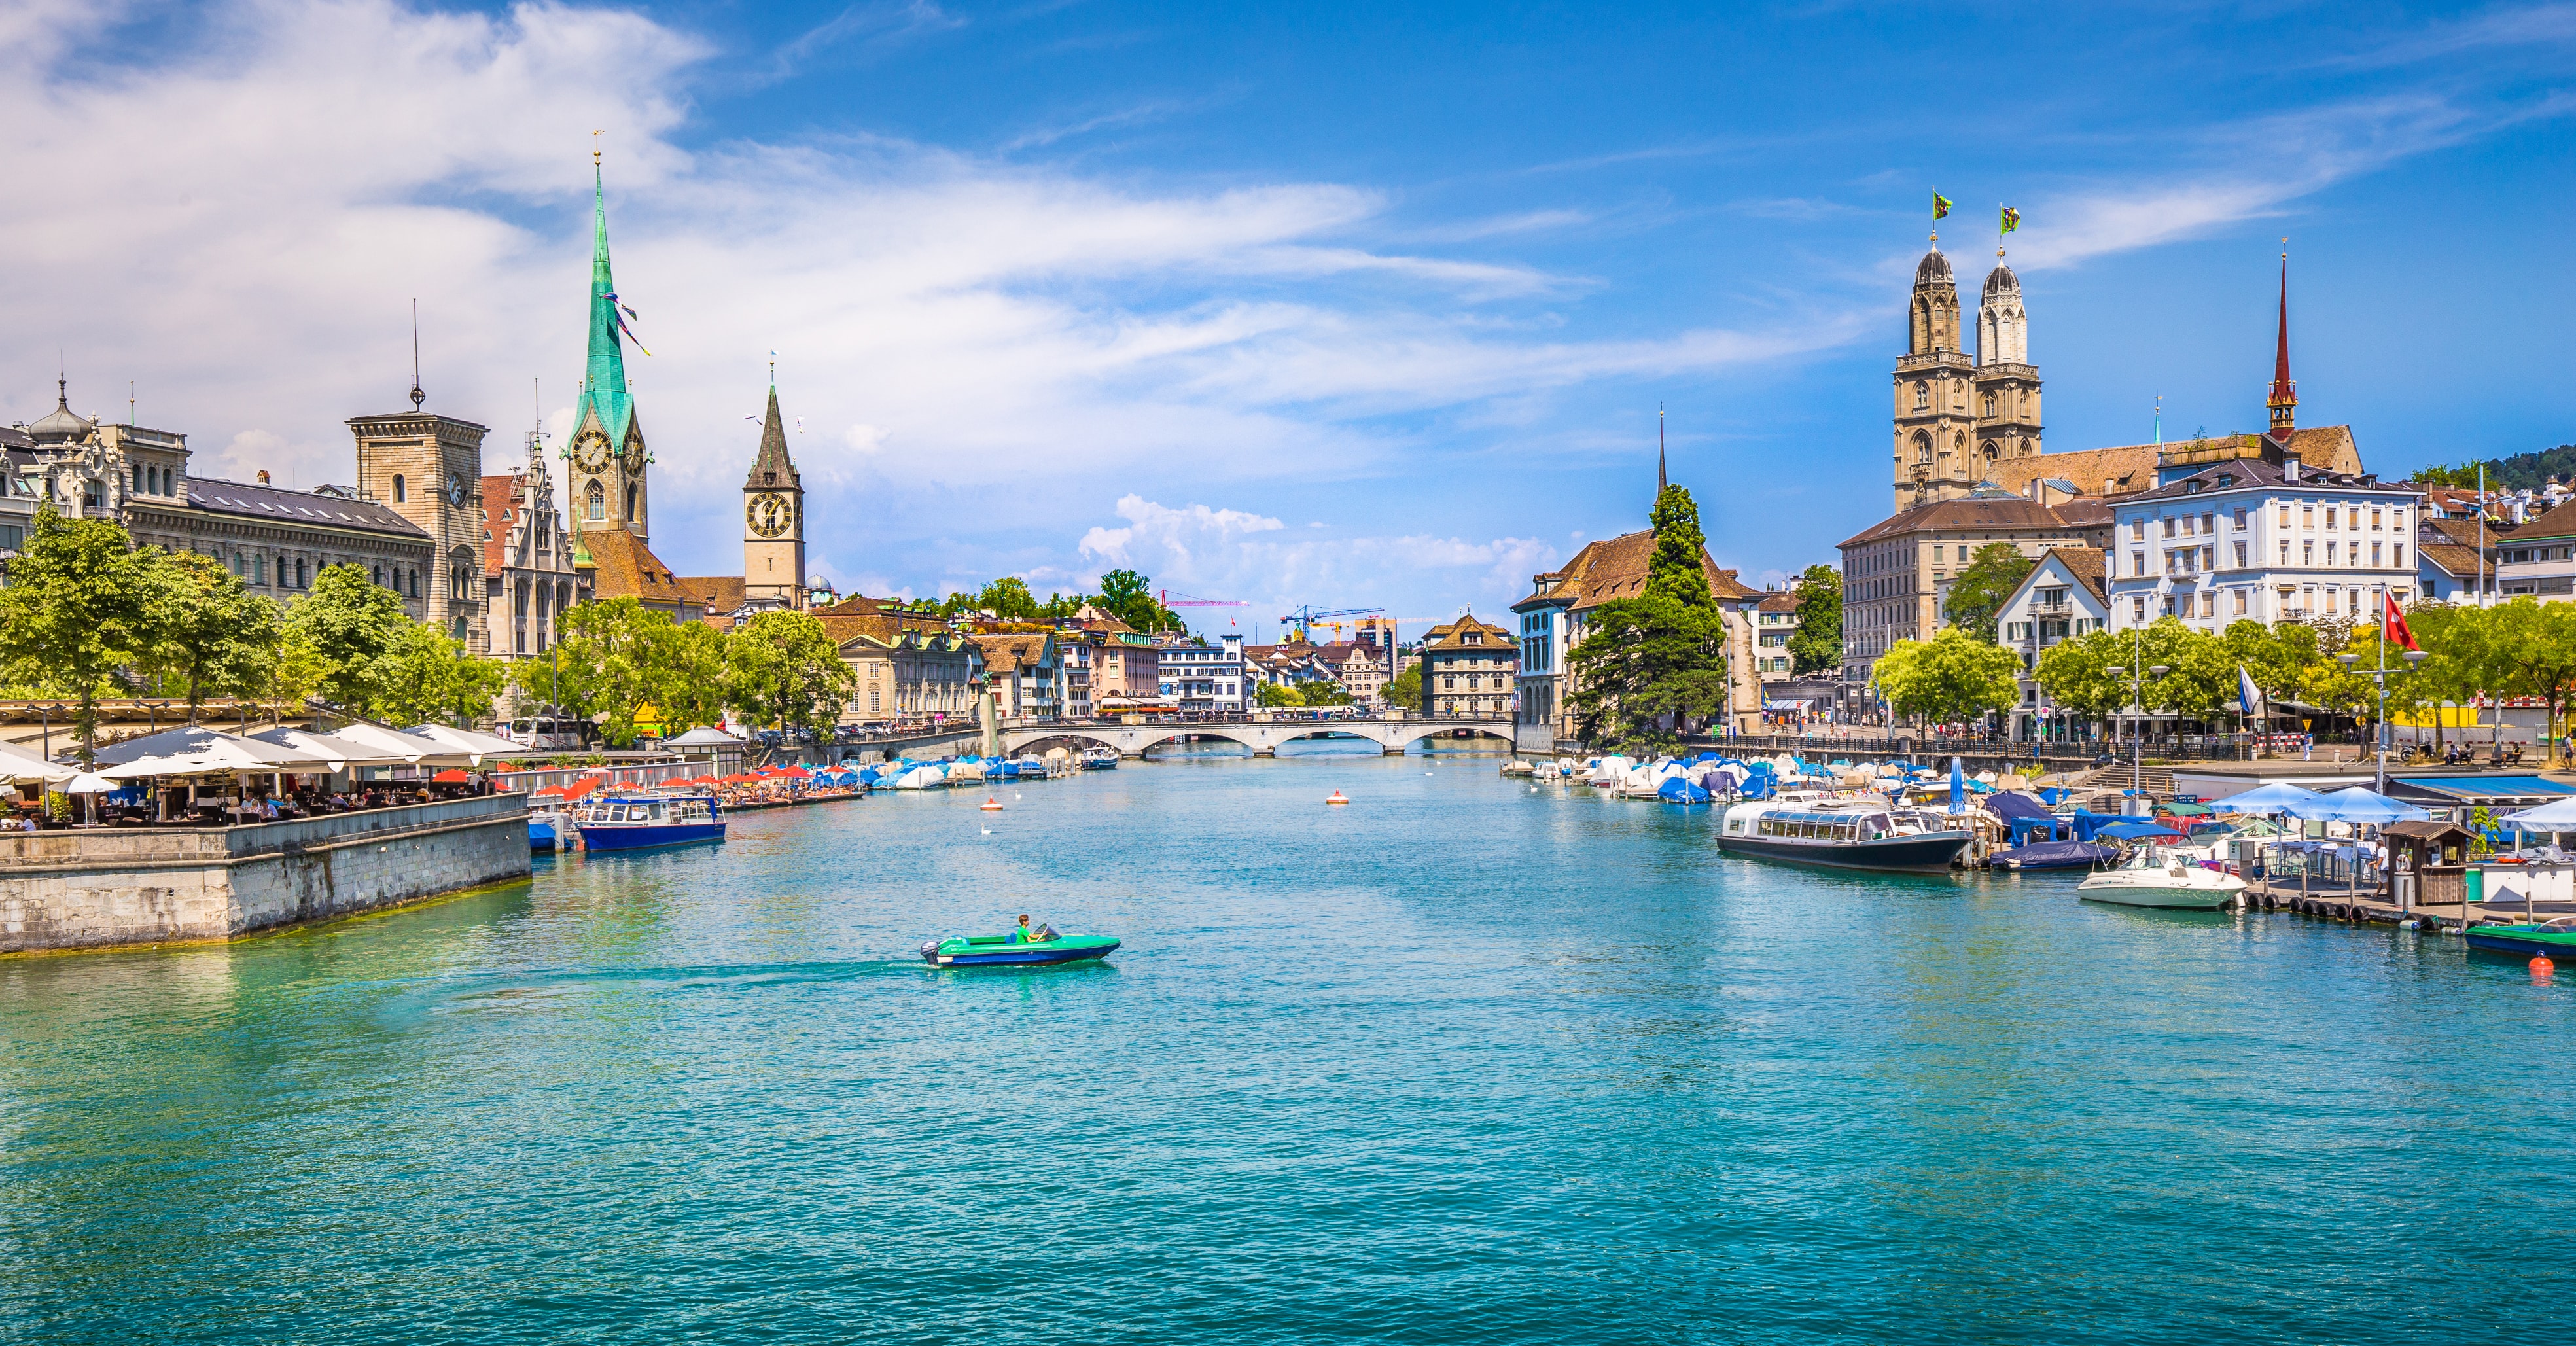 Limmat River  One of the Top Attractions in Zurich  